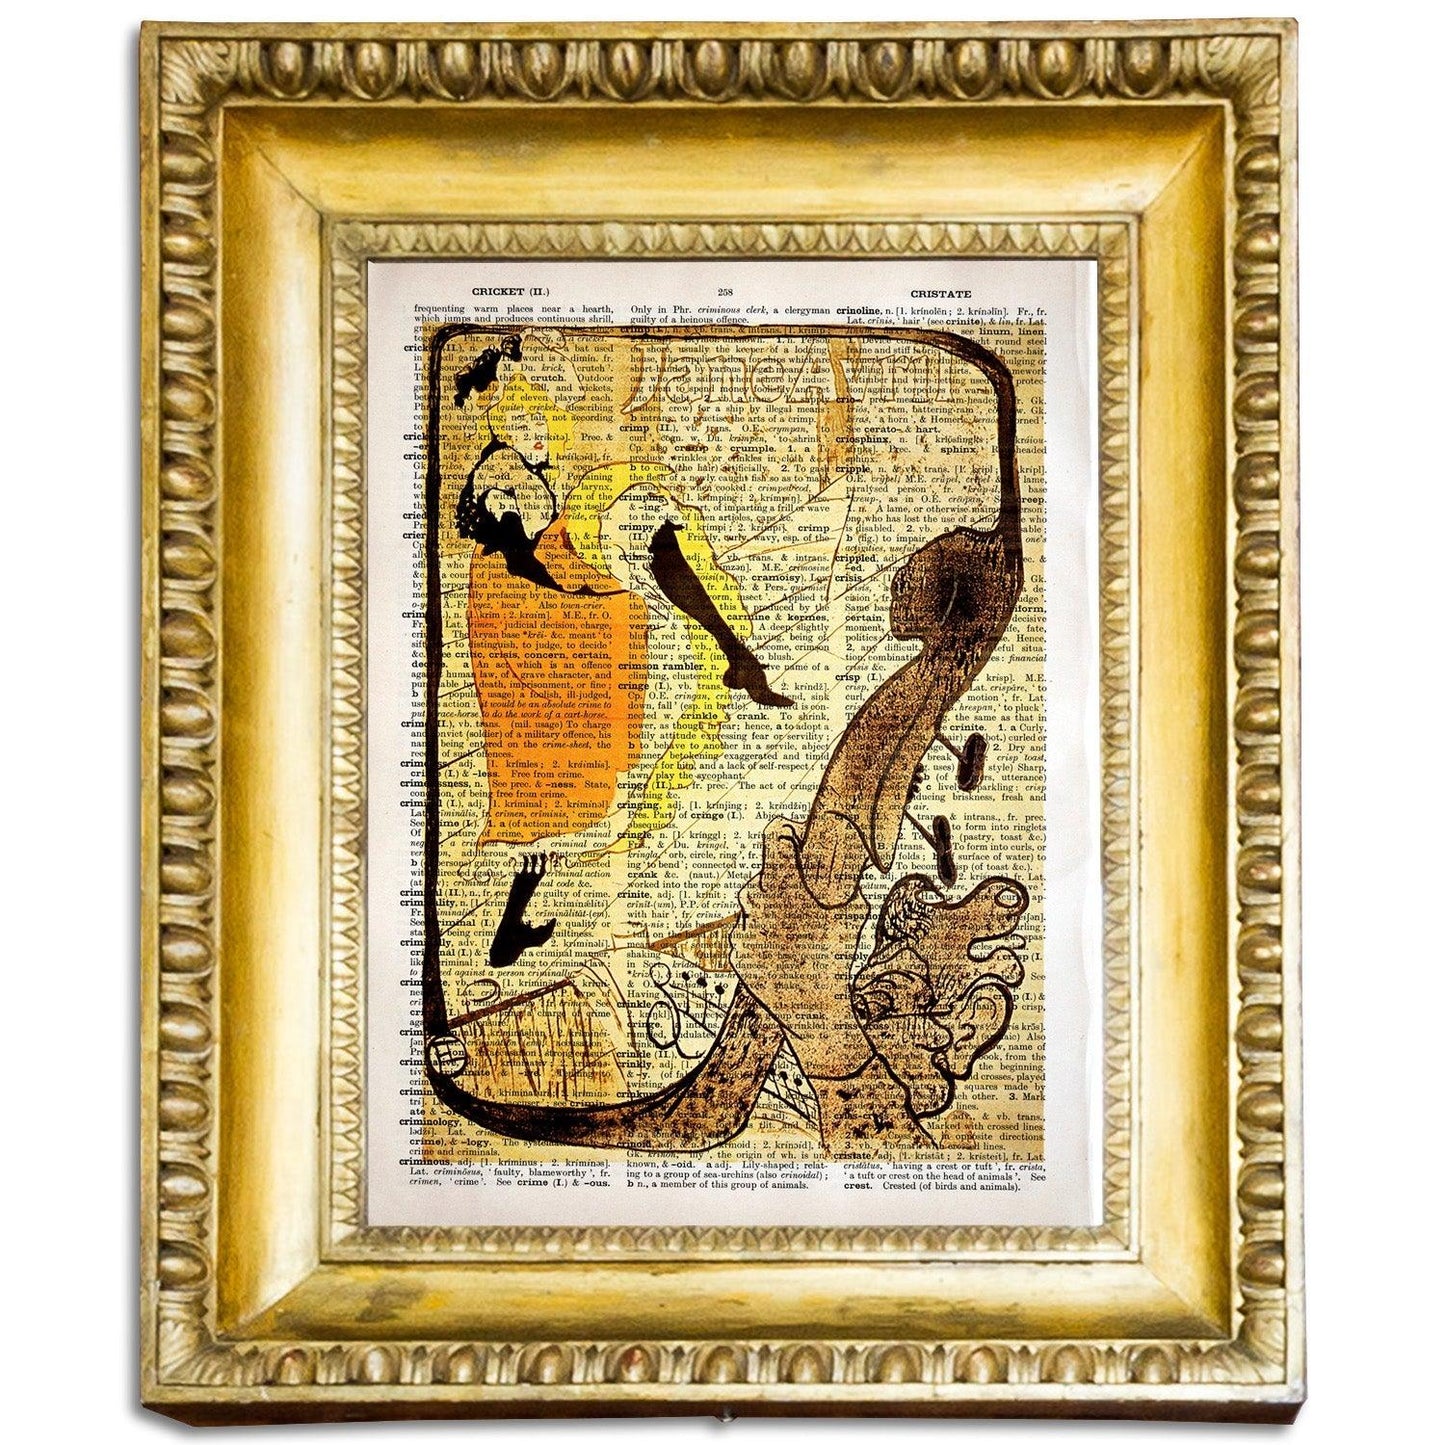 Give your home decor a touch of elegance through our exquisite Jane Avril reproduction poster. The artwork is a collage with the dancers in art design by Henri de Toulouse-Lautrec (French printmaker, 1864-1901). Year of created 1893.